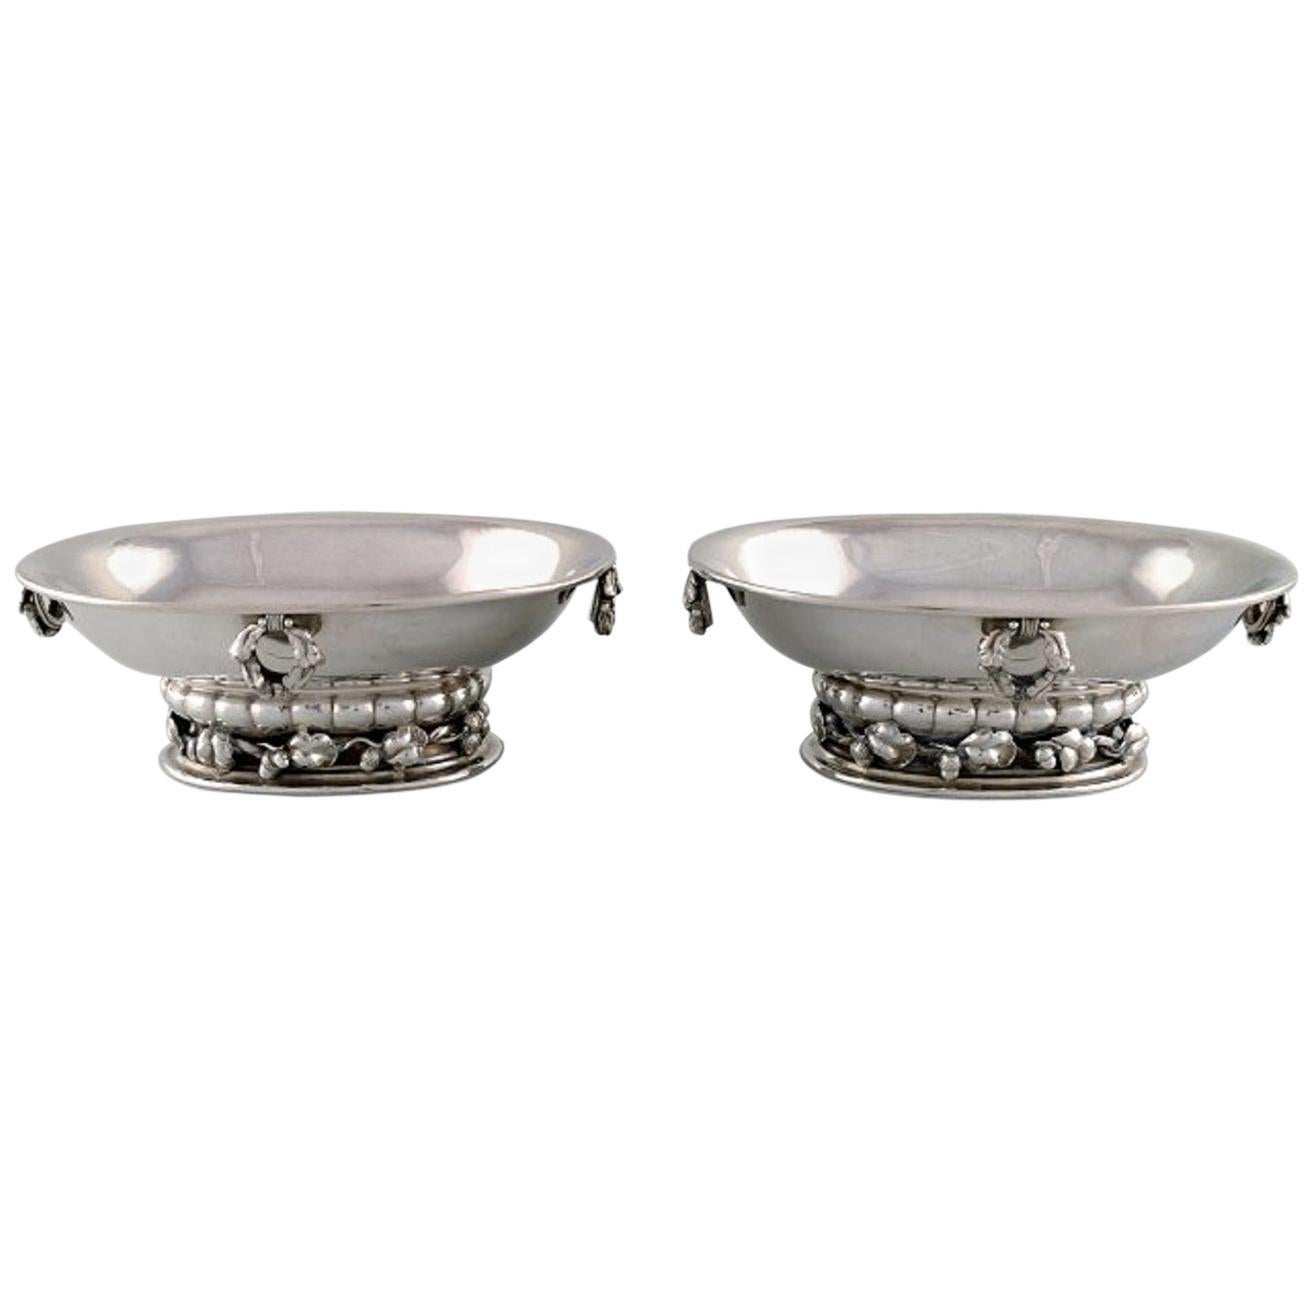 Pair of Rare Georg Jensen Jardinières in Sterling Silver, Dated 1925-1932